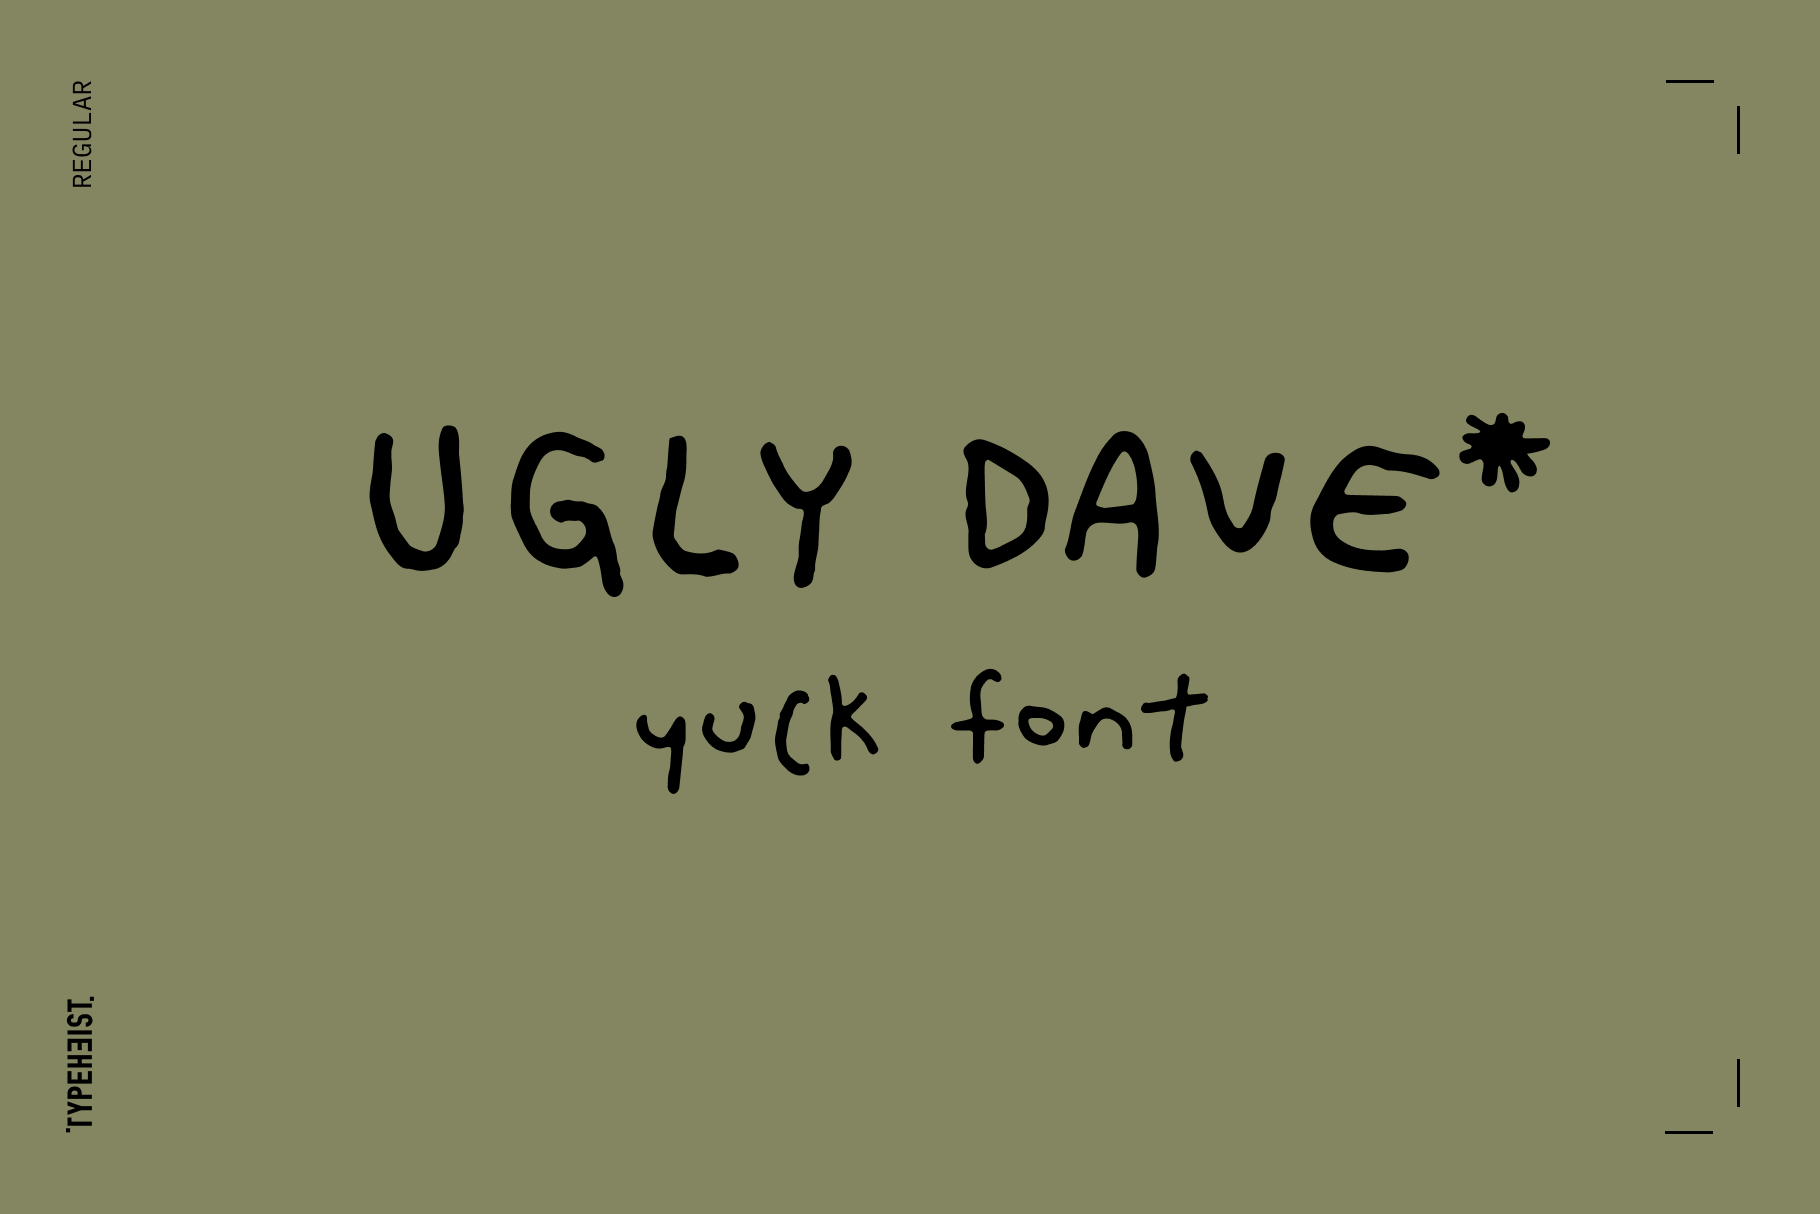 Ugly Dave